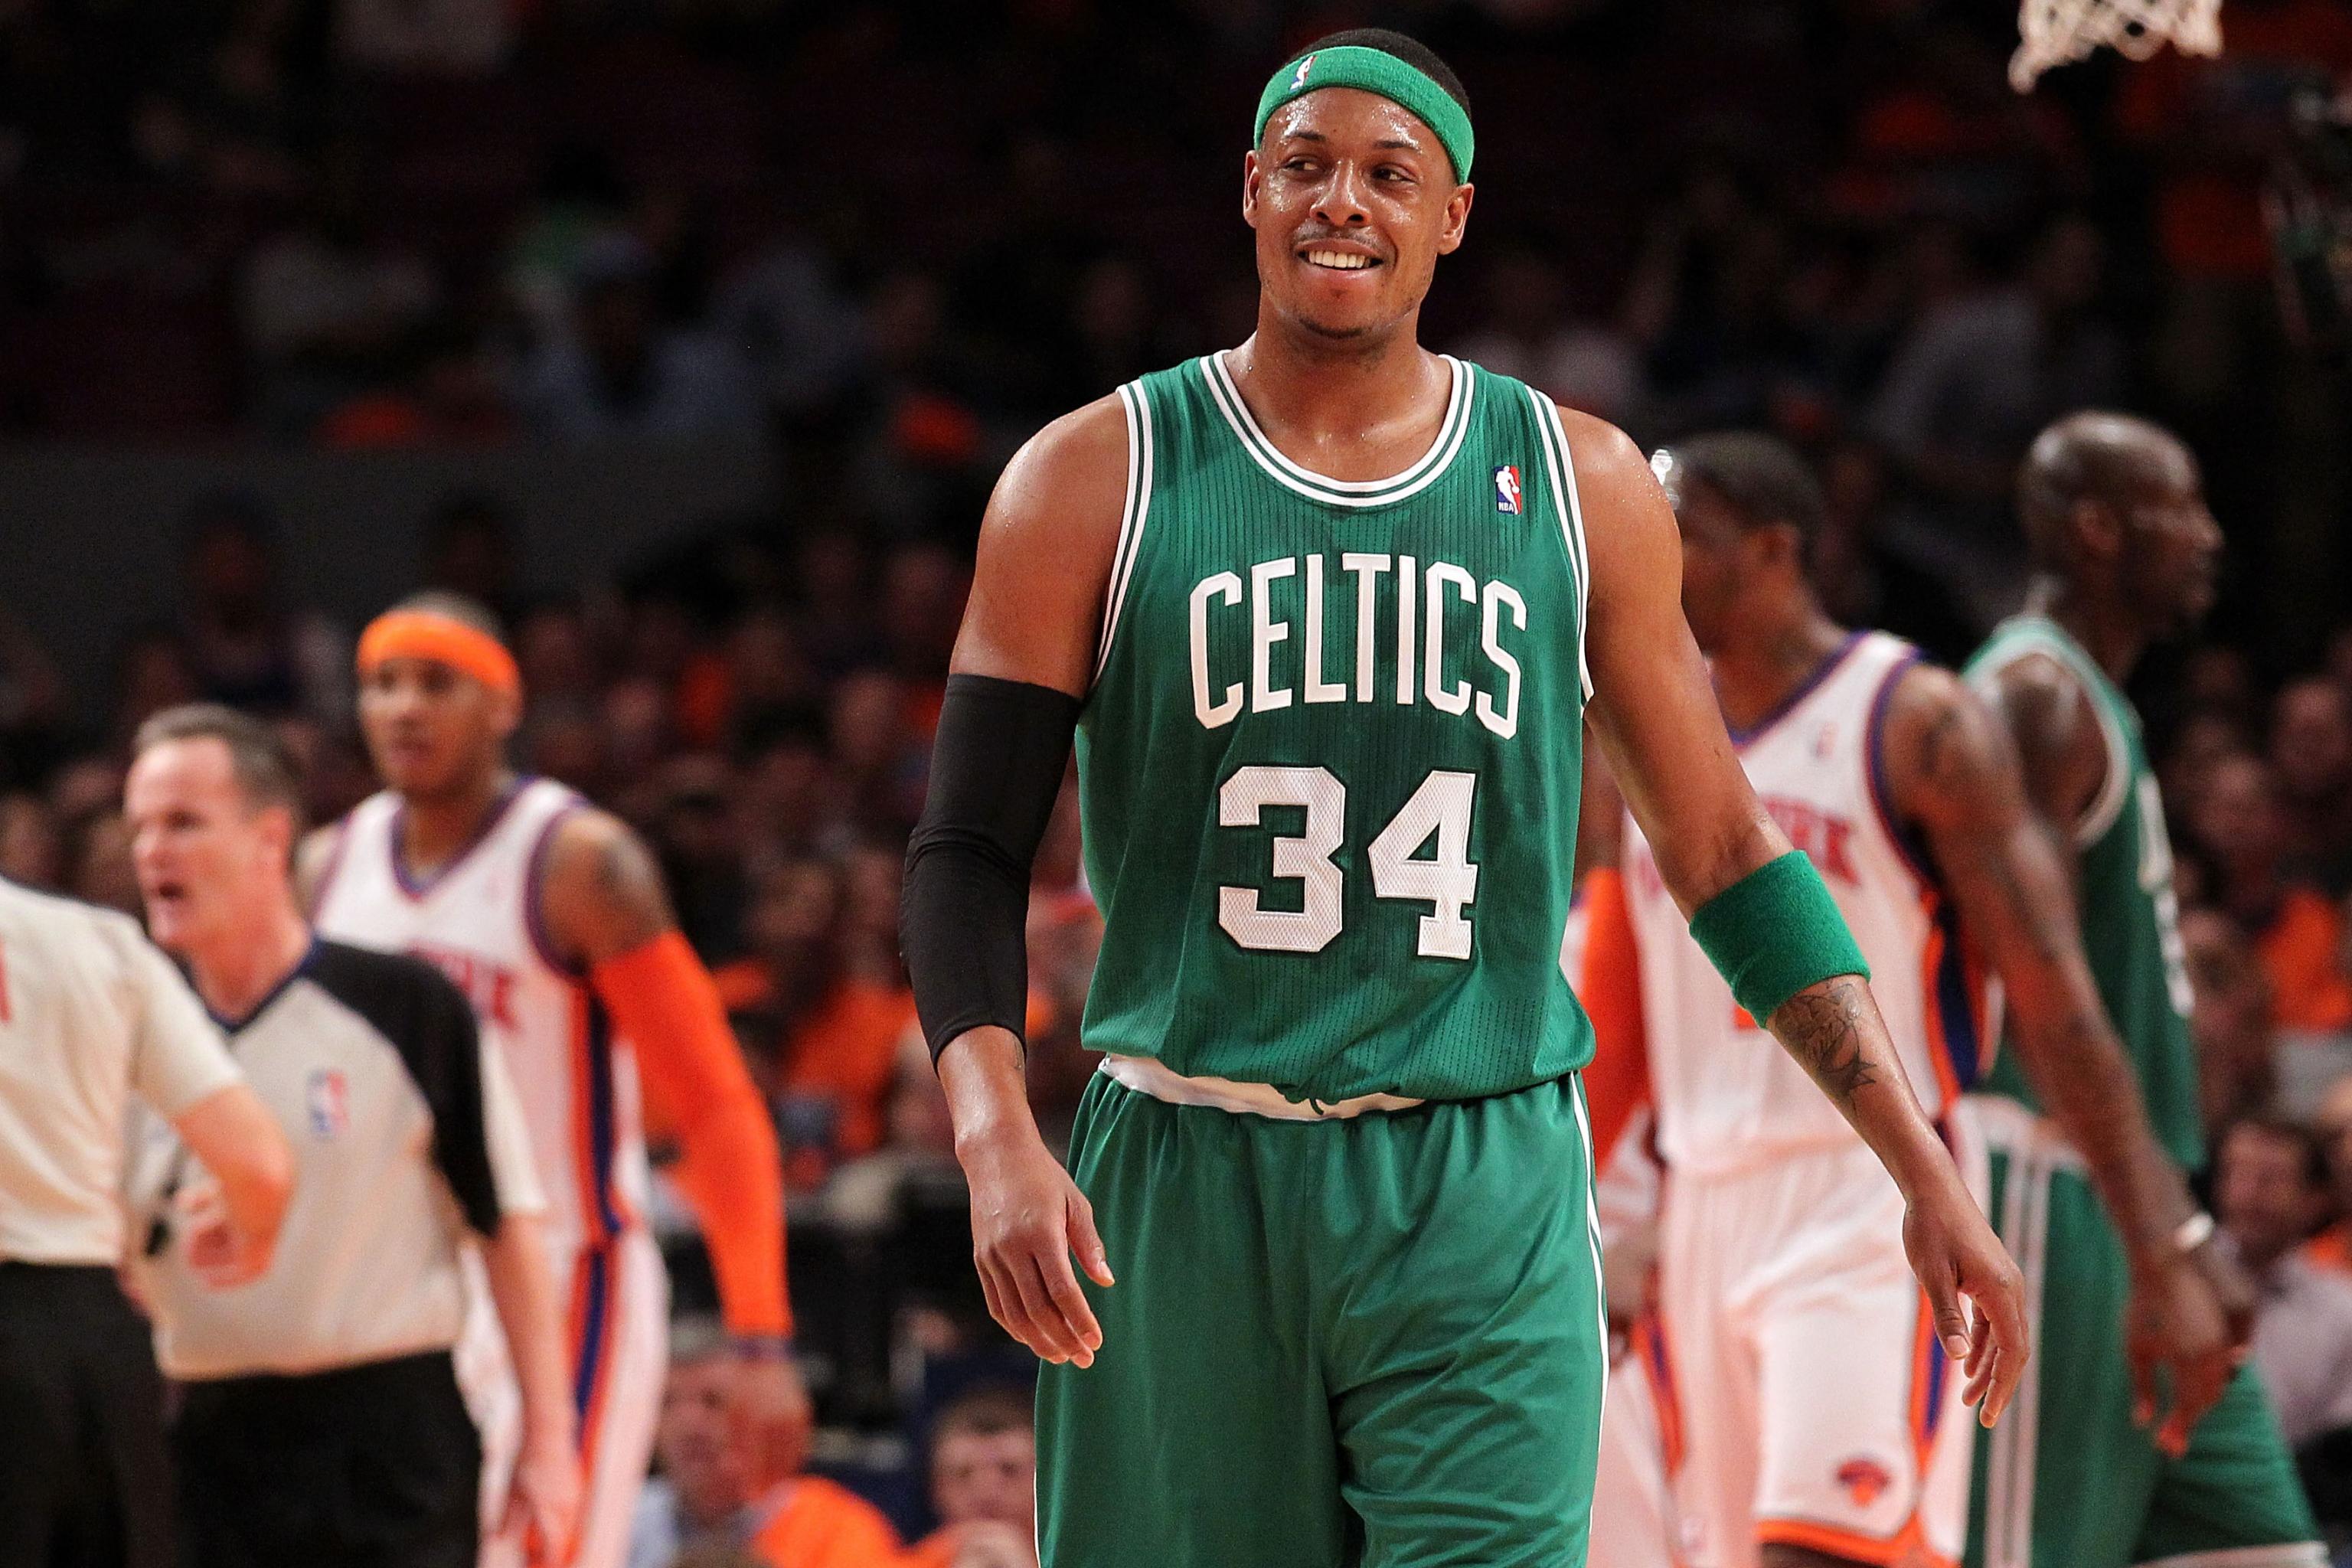 Paul Pierce says Miami Dolphins won't make playoffs and will